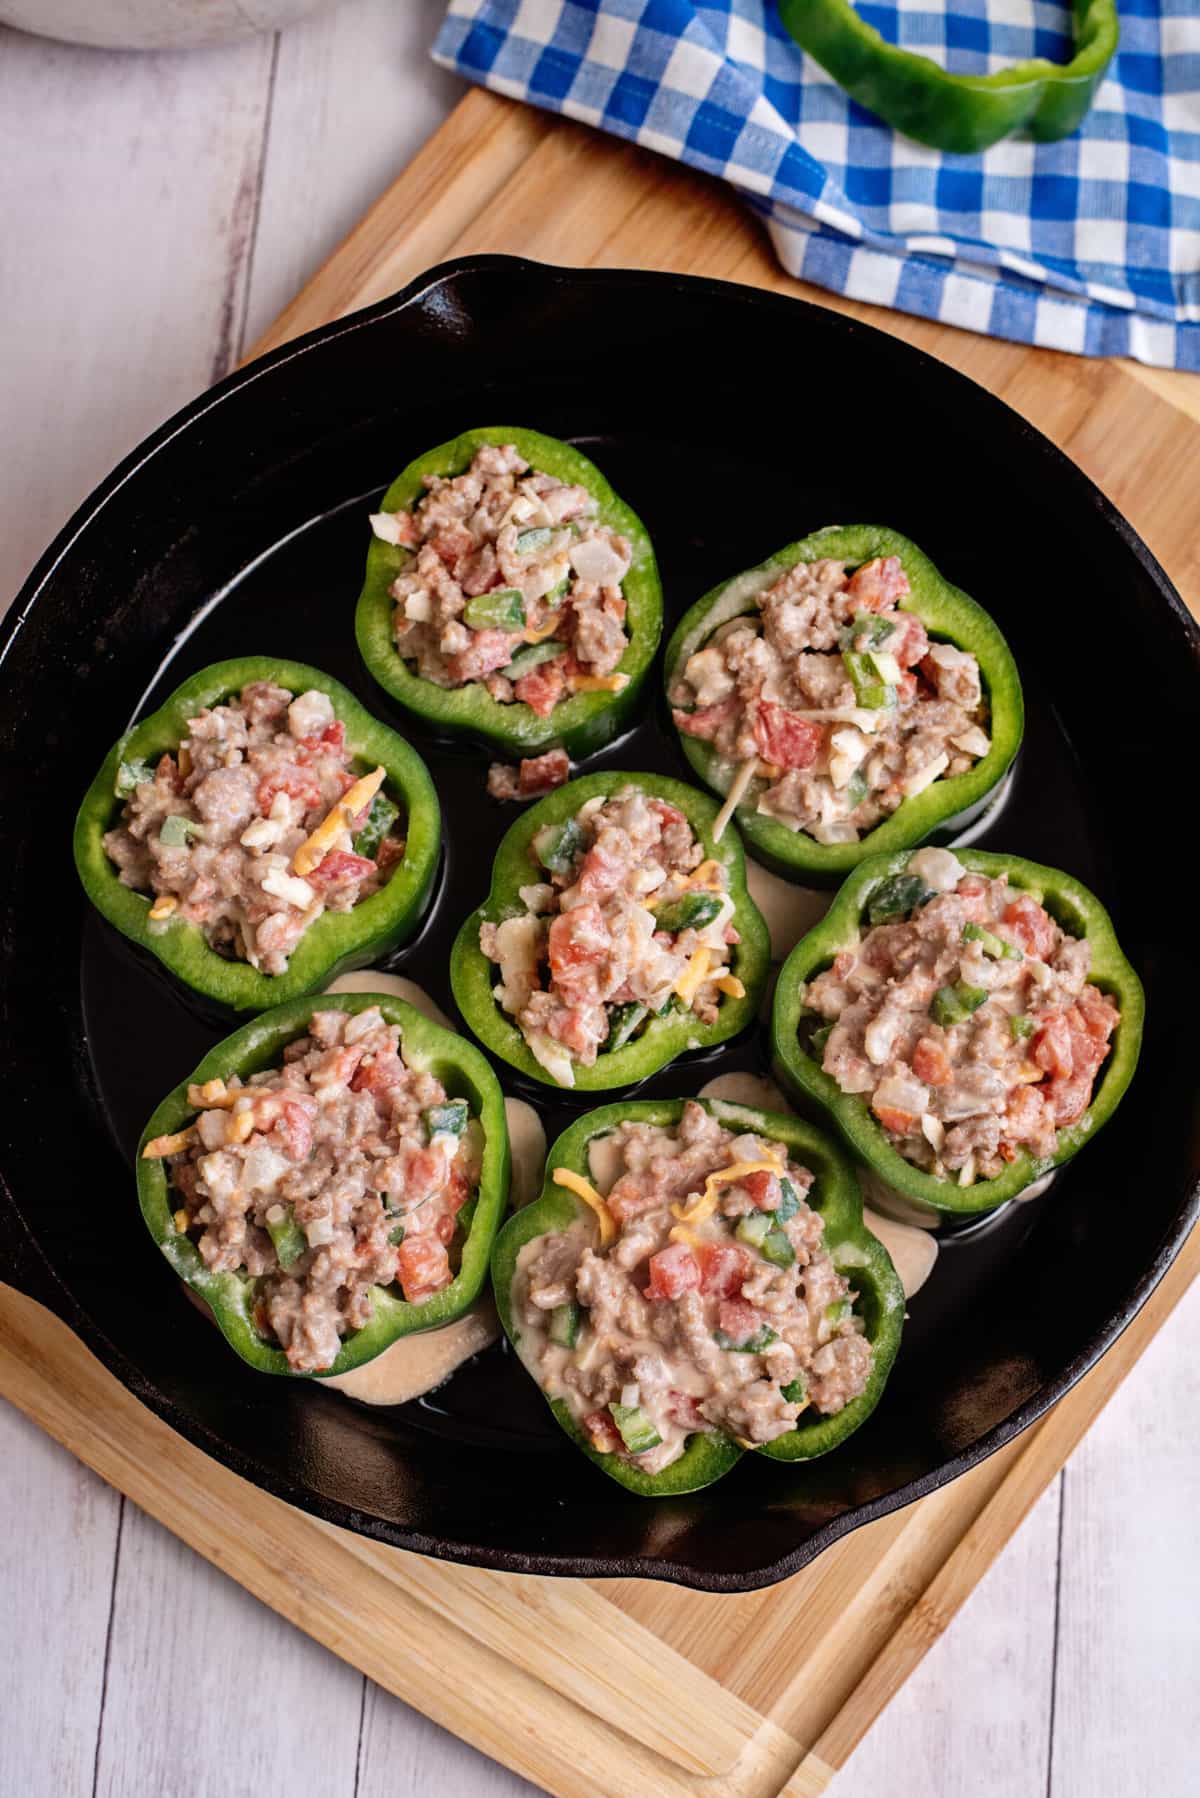 Baked sausage stuffed peppers.